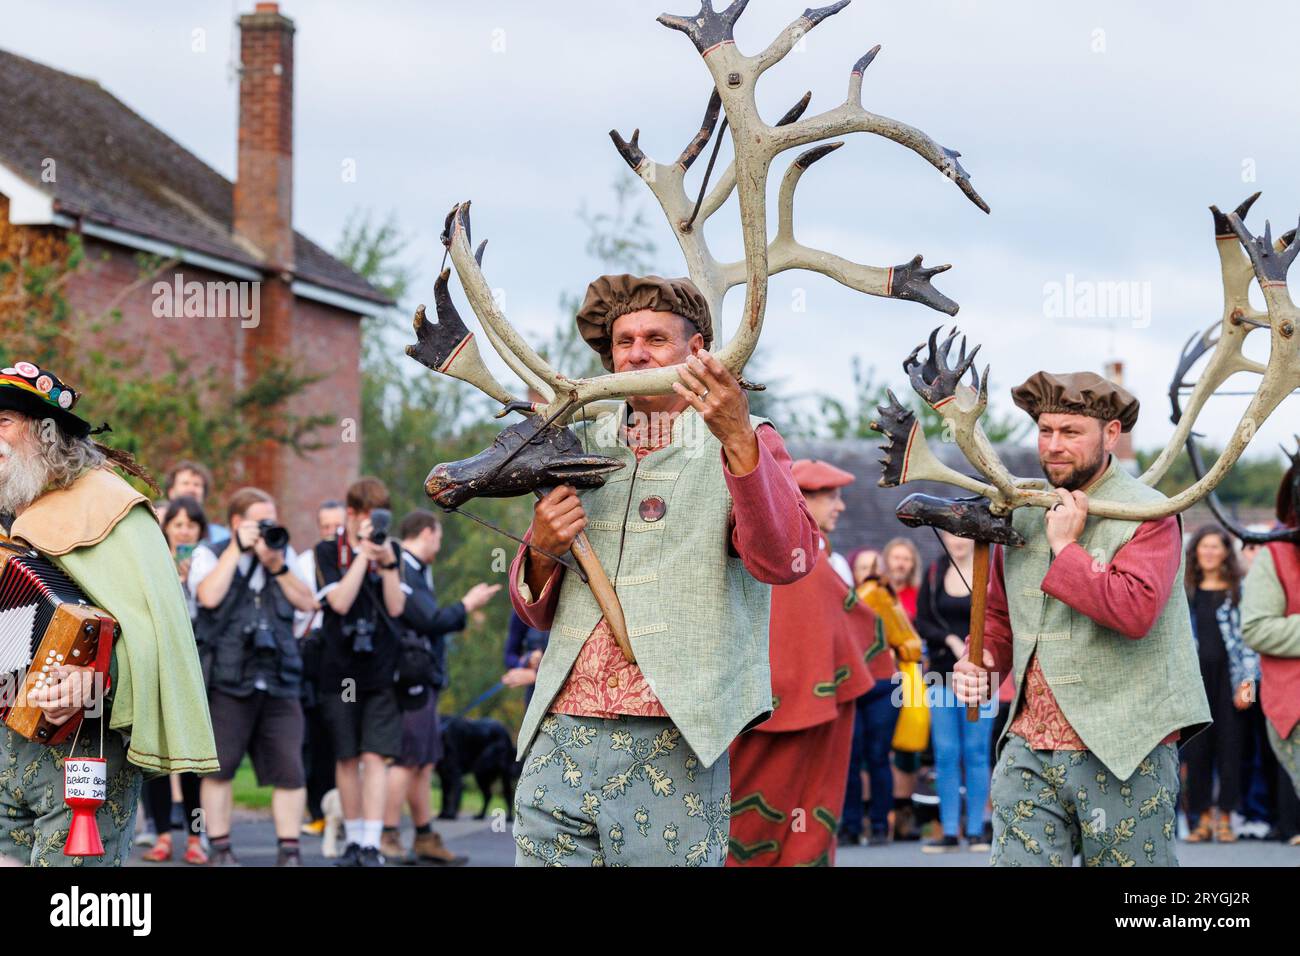 The Abbots Bromley Horn Dancers as they make their way dancing around Abbots Bromley at the start of the day. The dance has been performed since 1226. Antlers are removed from the local church at 7.45am, blessed and the dancers then perform their dances around local villages until 8pm, when once again the antlers are locked away for another year. The annual ritual involves reindeer antlers, a hobby horse, Maid Marian and a fool. Stock Photo